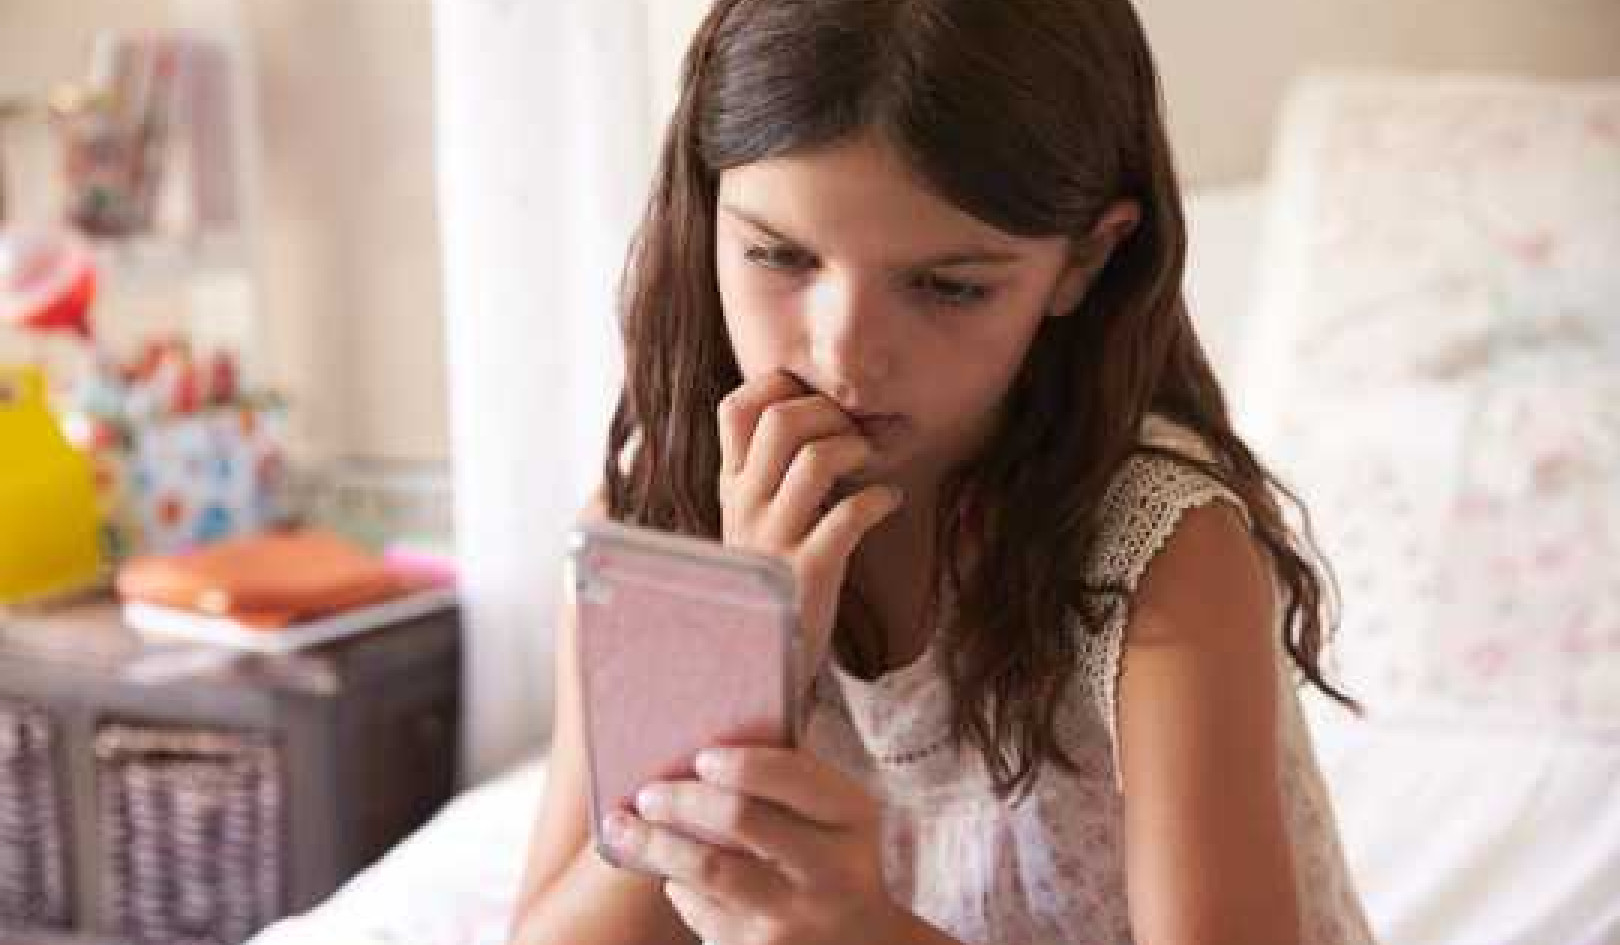 We Don't Know The True Extent Of Cyberbullying -- Yet